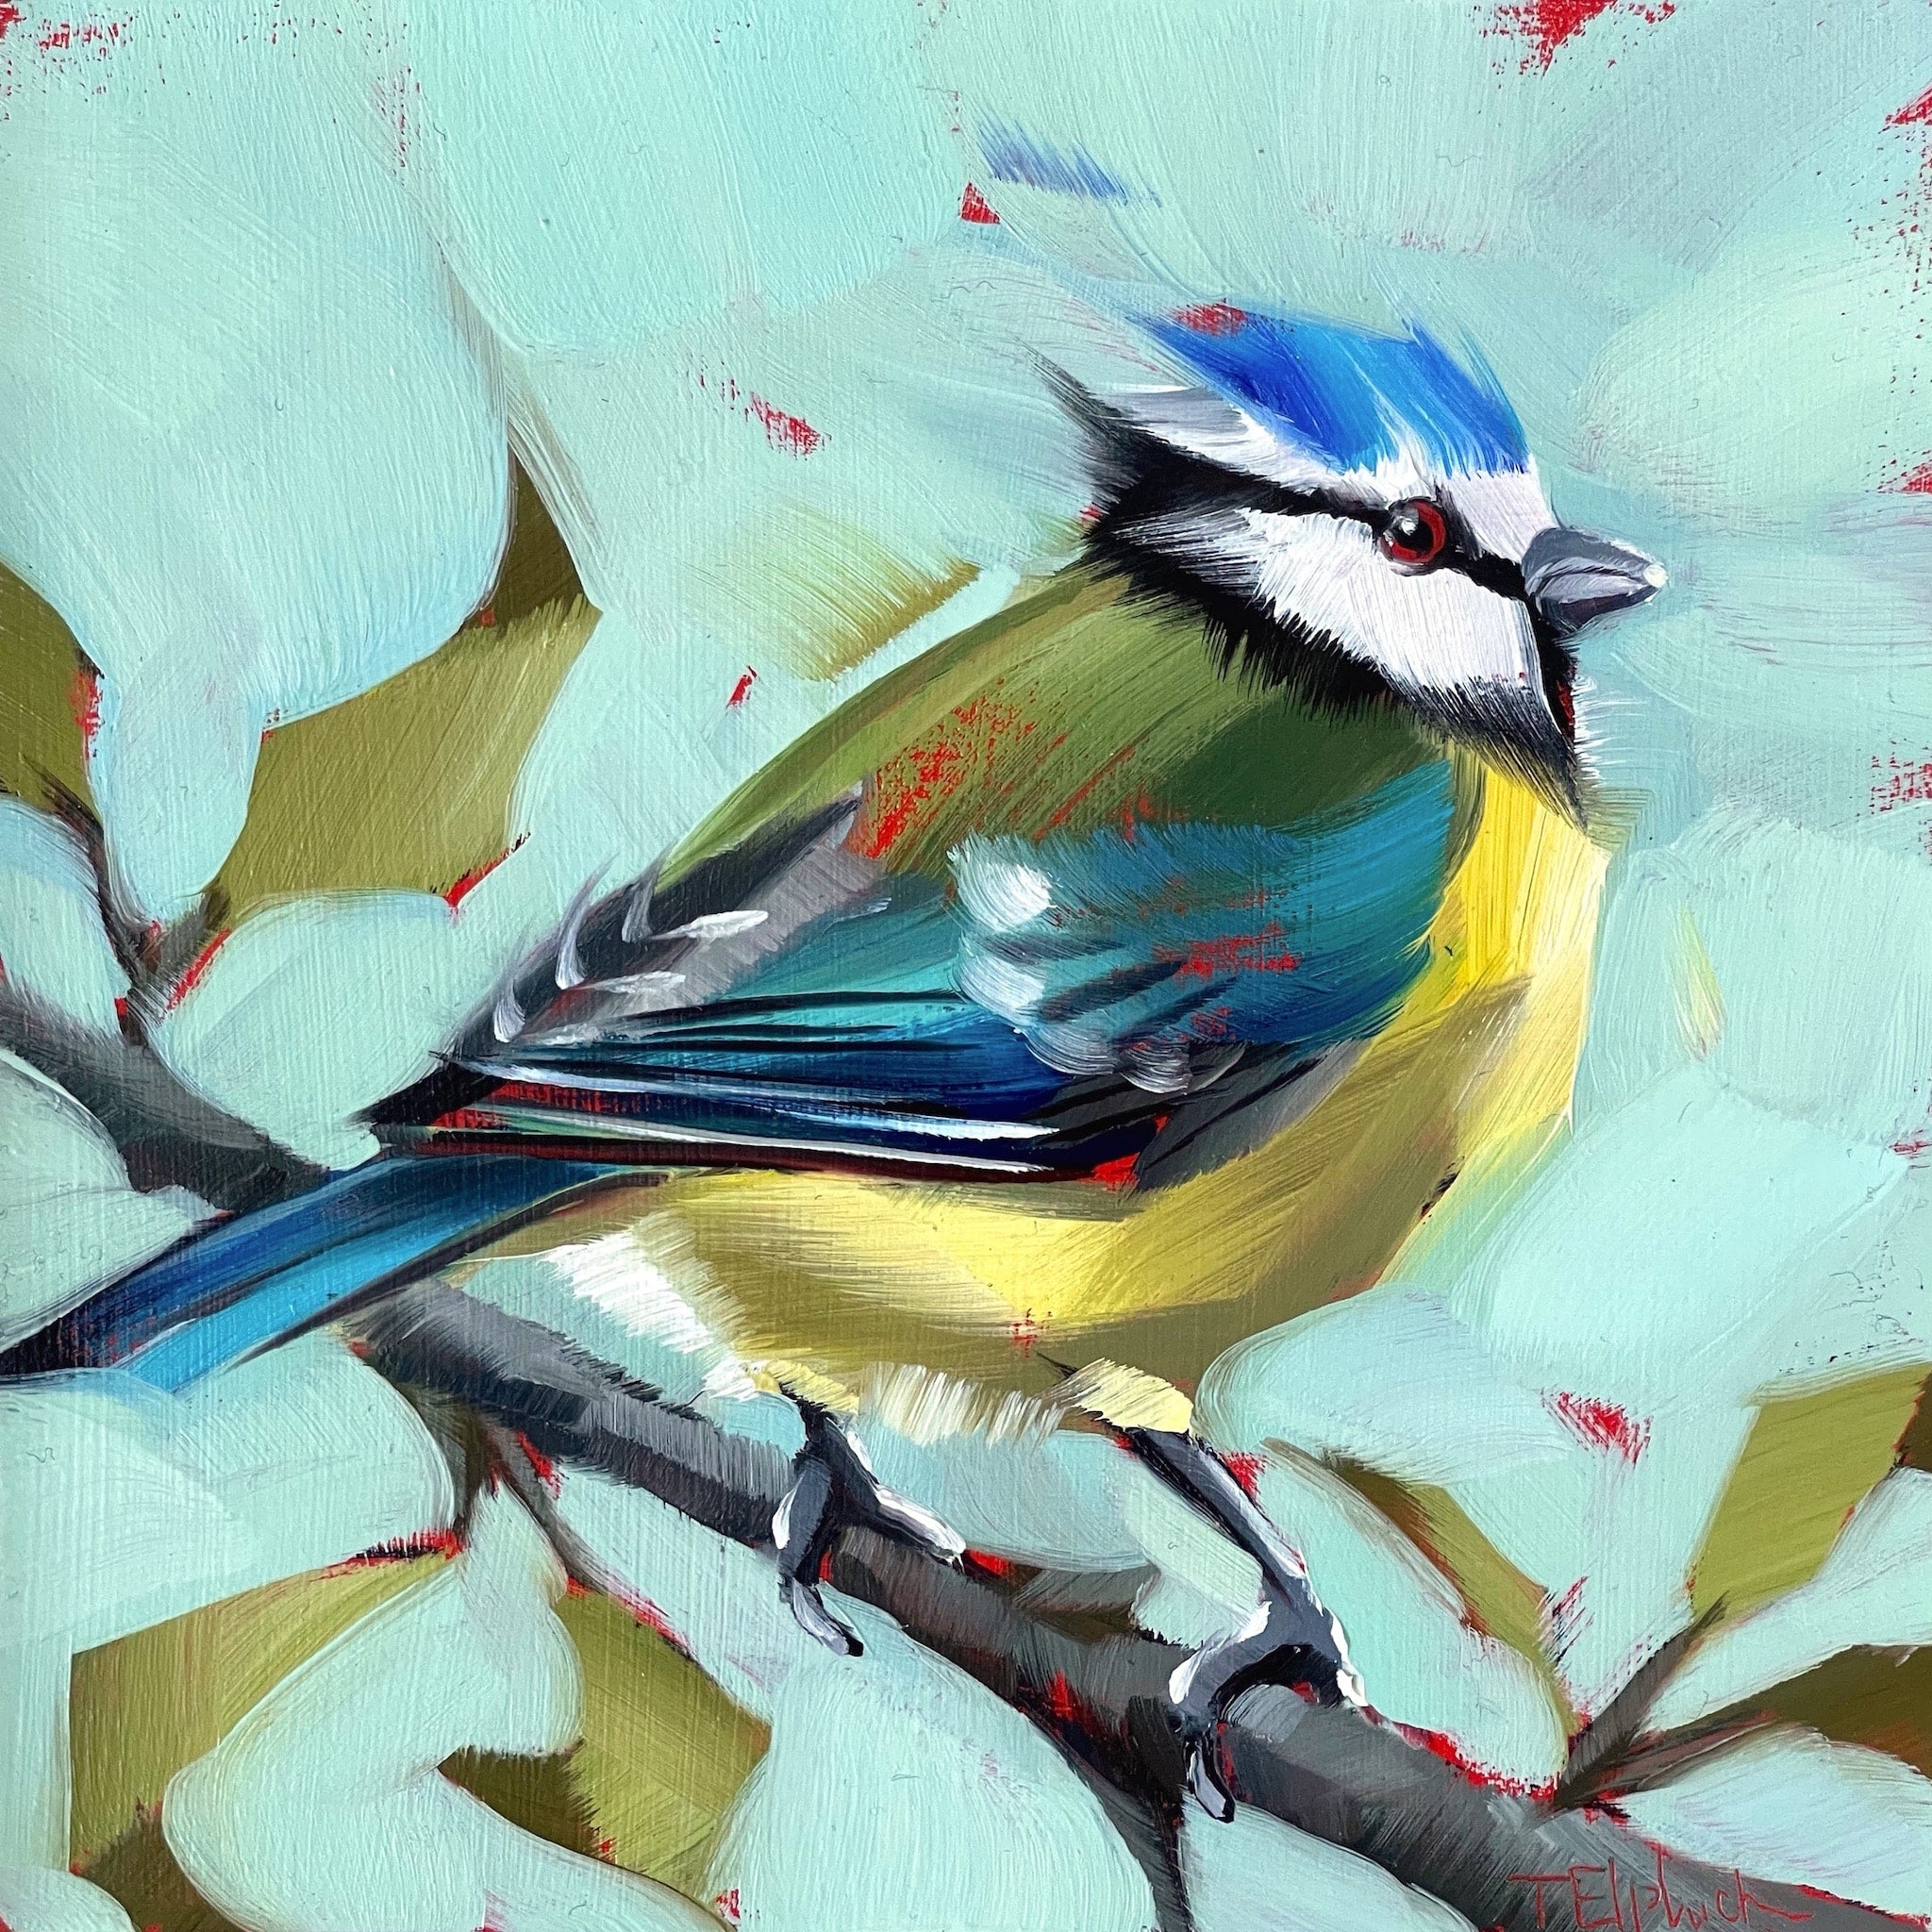 Painting of a blue tit by artist Tracey Elphick